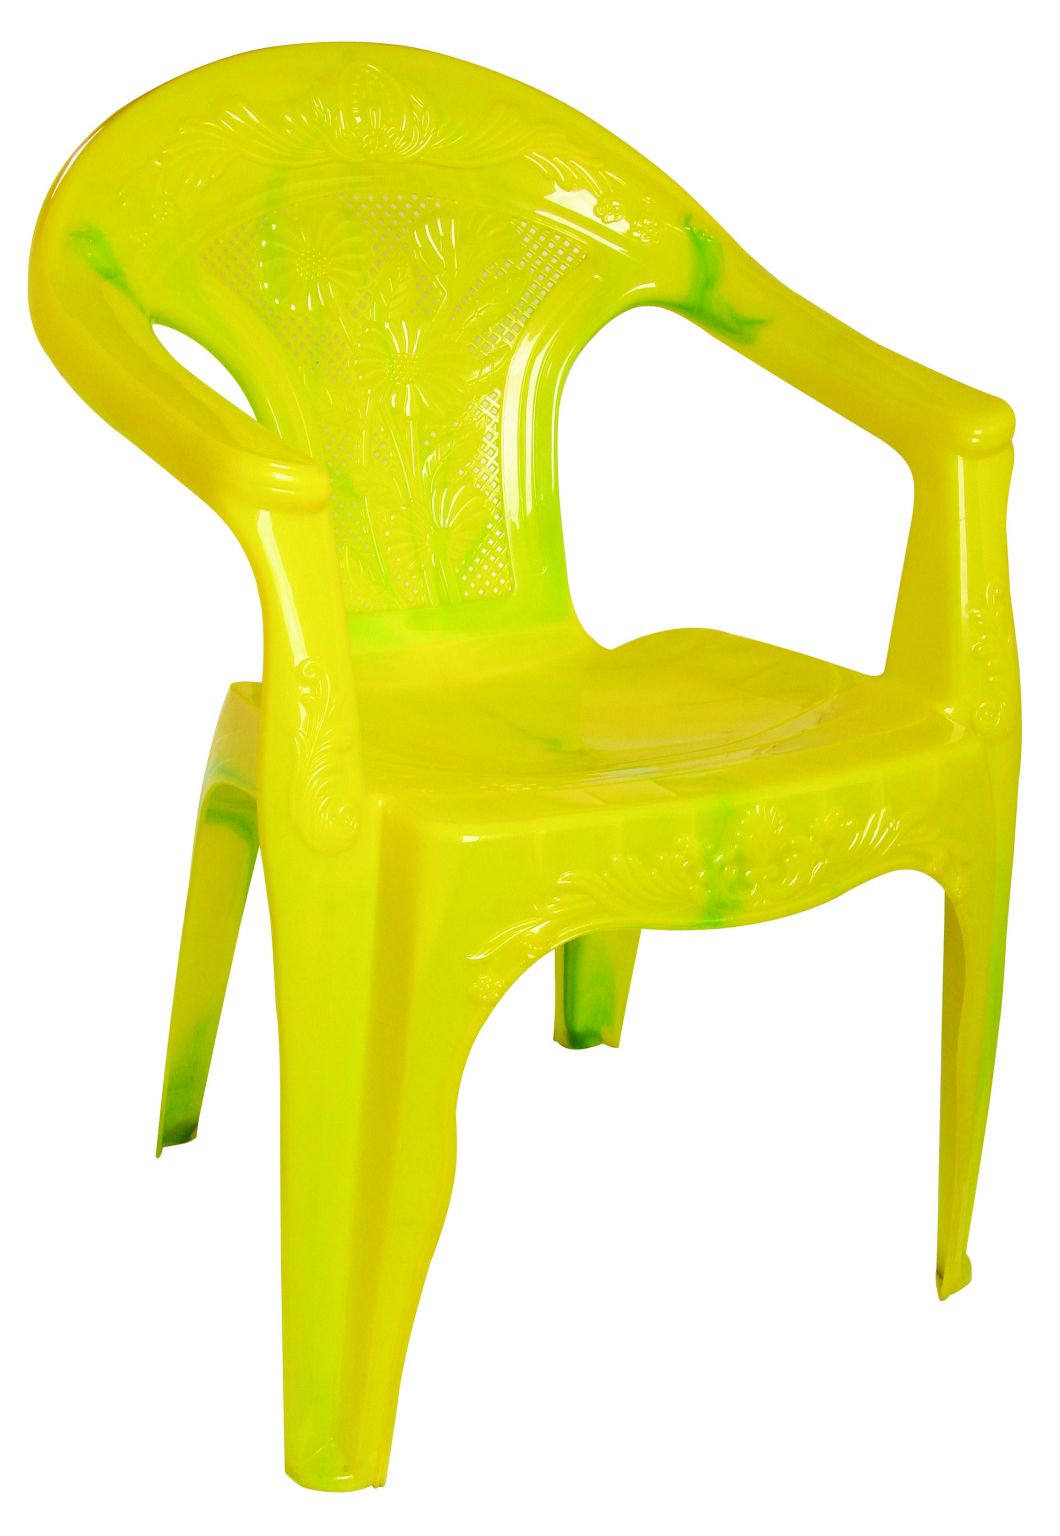 Plastic Injection Modern Furniture Chair Mold